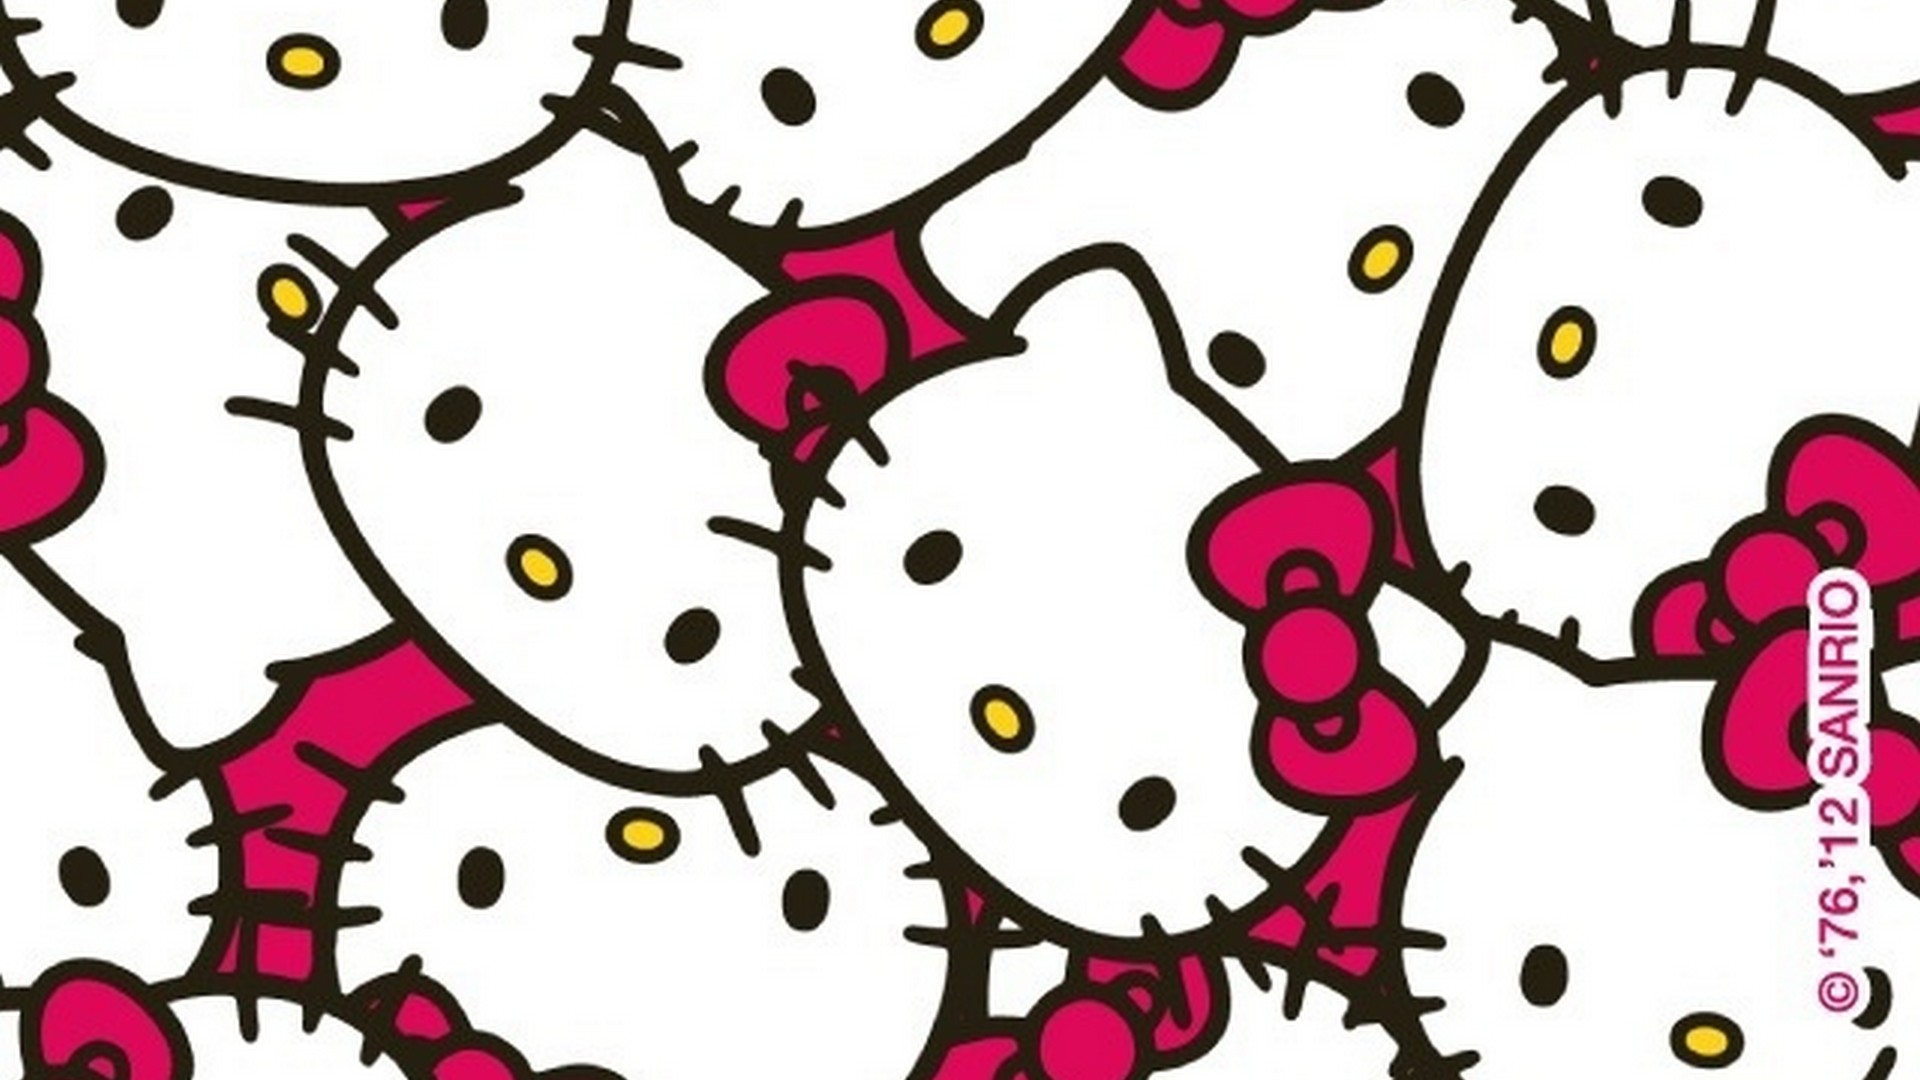 Desktop Wallpaper Hello Kitty with image resolution 1920x1080 pixel. You can use this wallpaper as background for your desktop Computer Screensavers, Android or iPhone smartphones